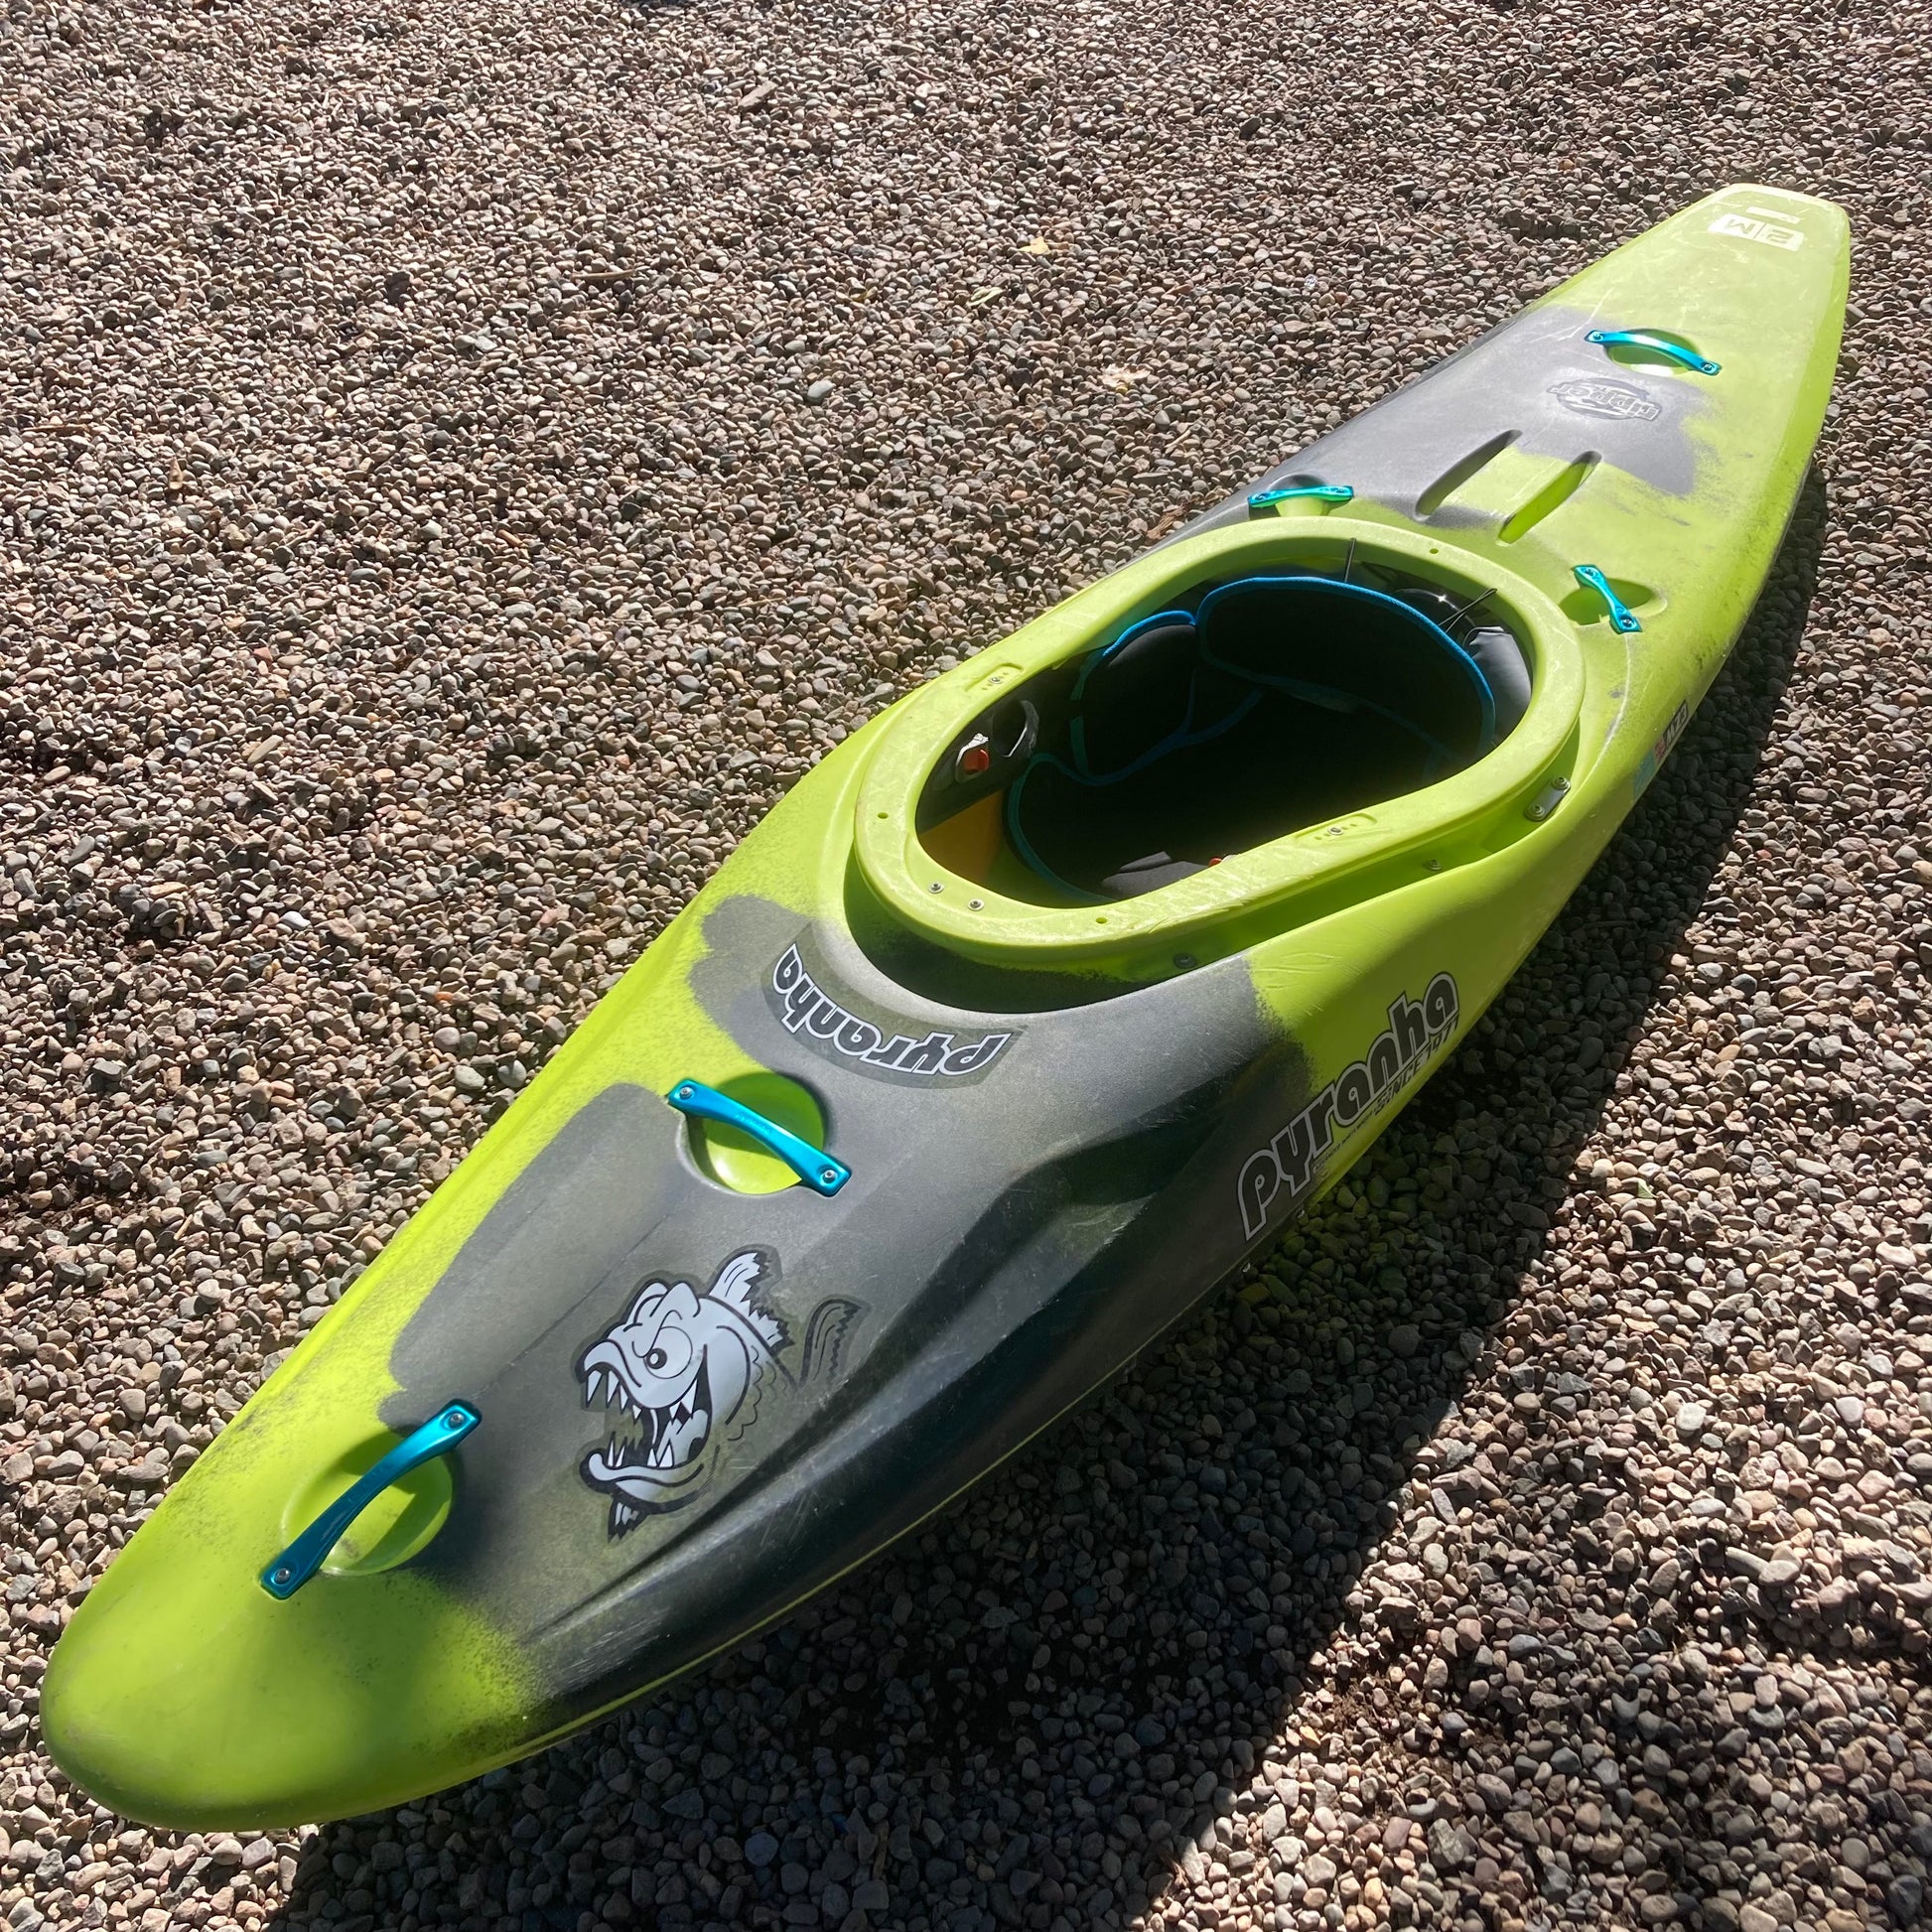 A Demo Ripper 2.0 MD Pyranha kayak laying on the ground.